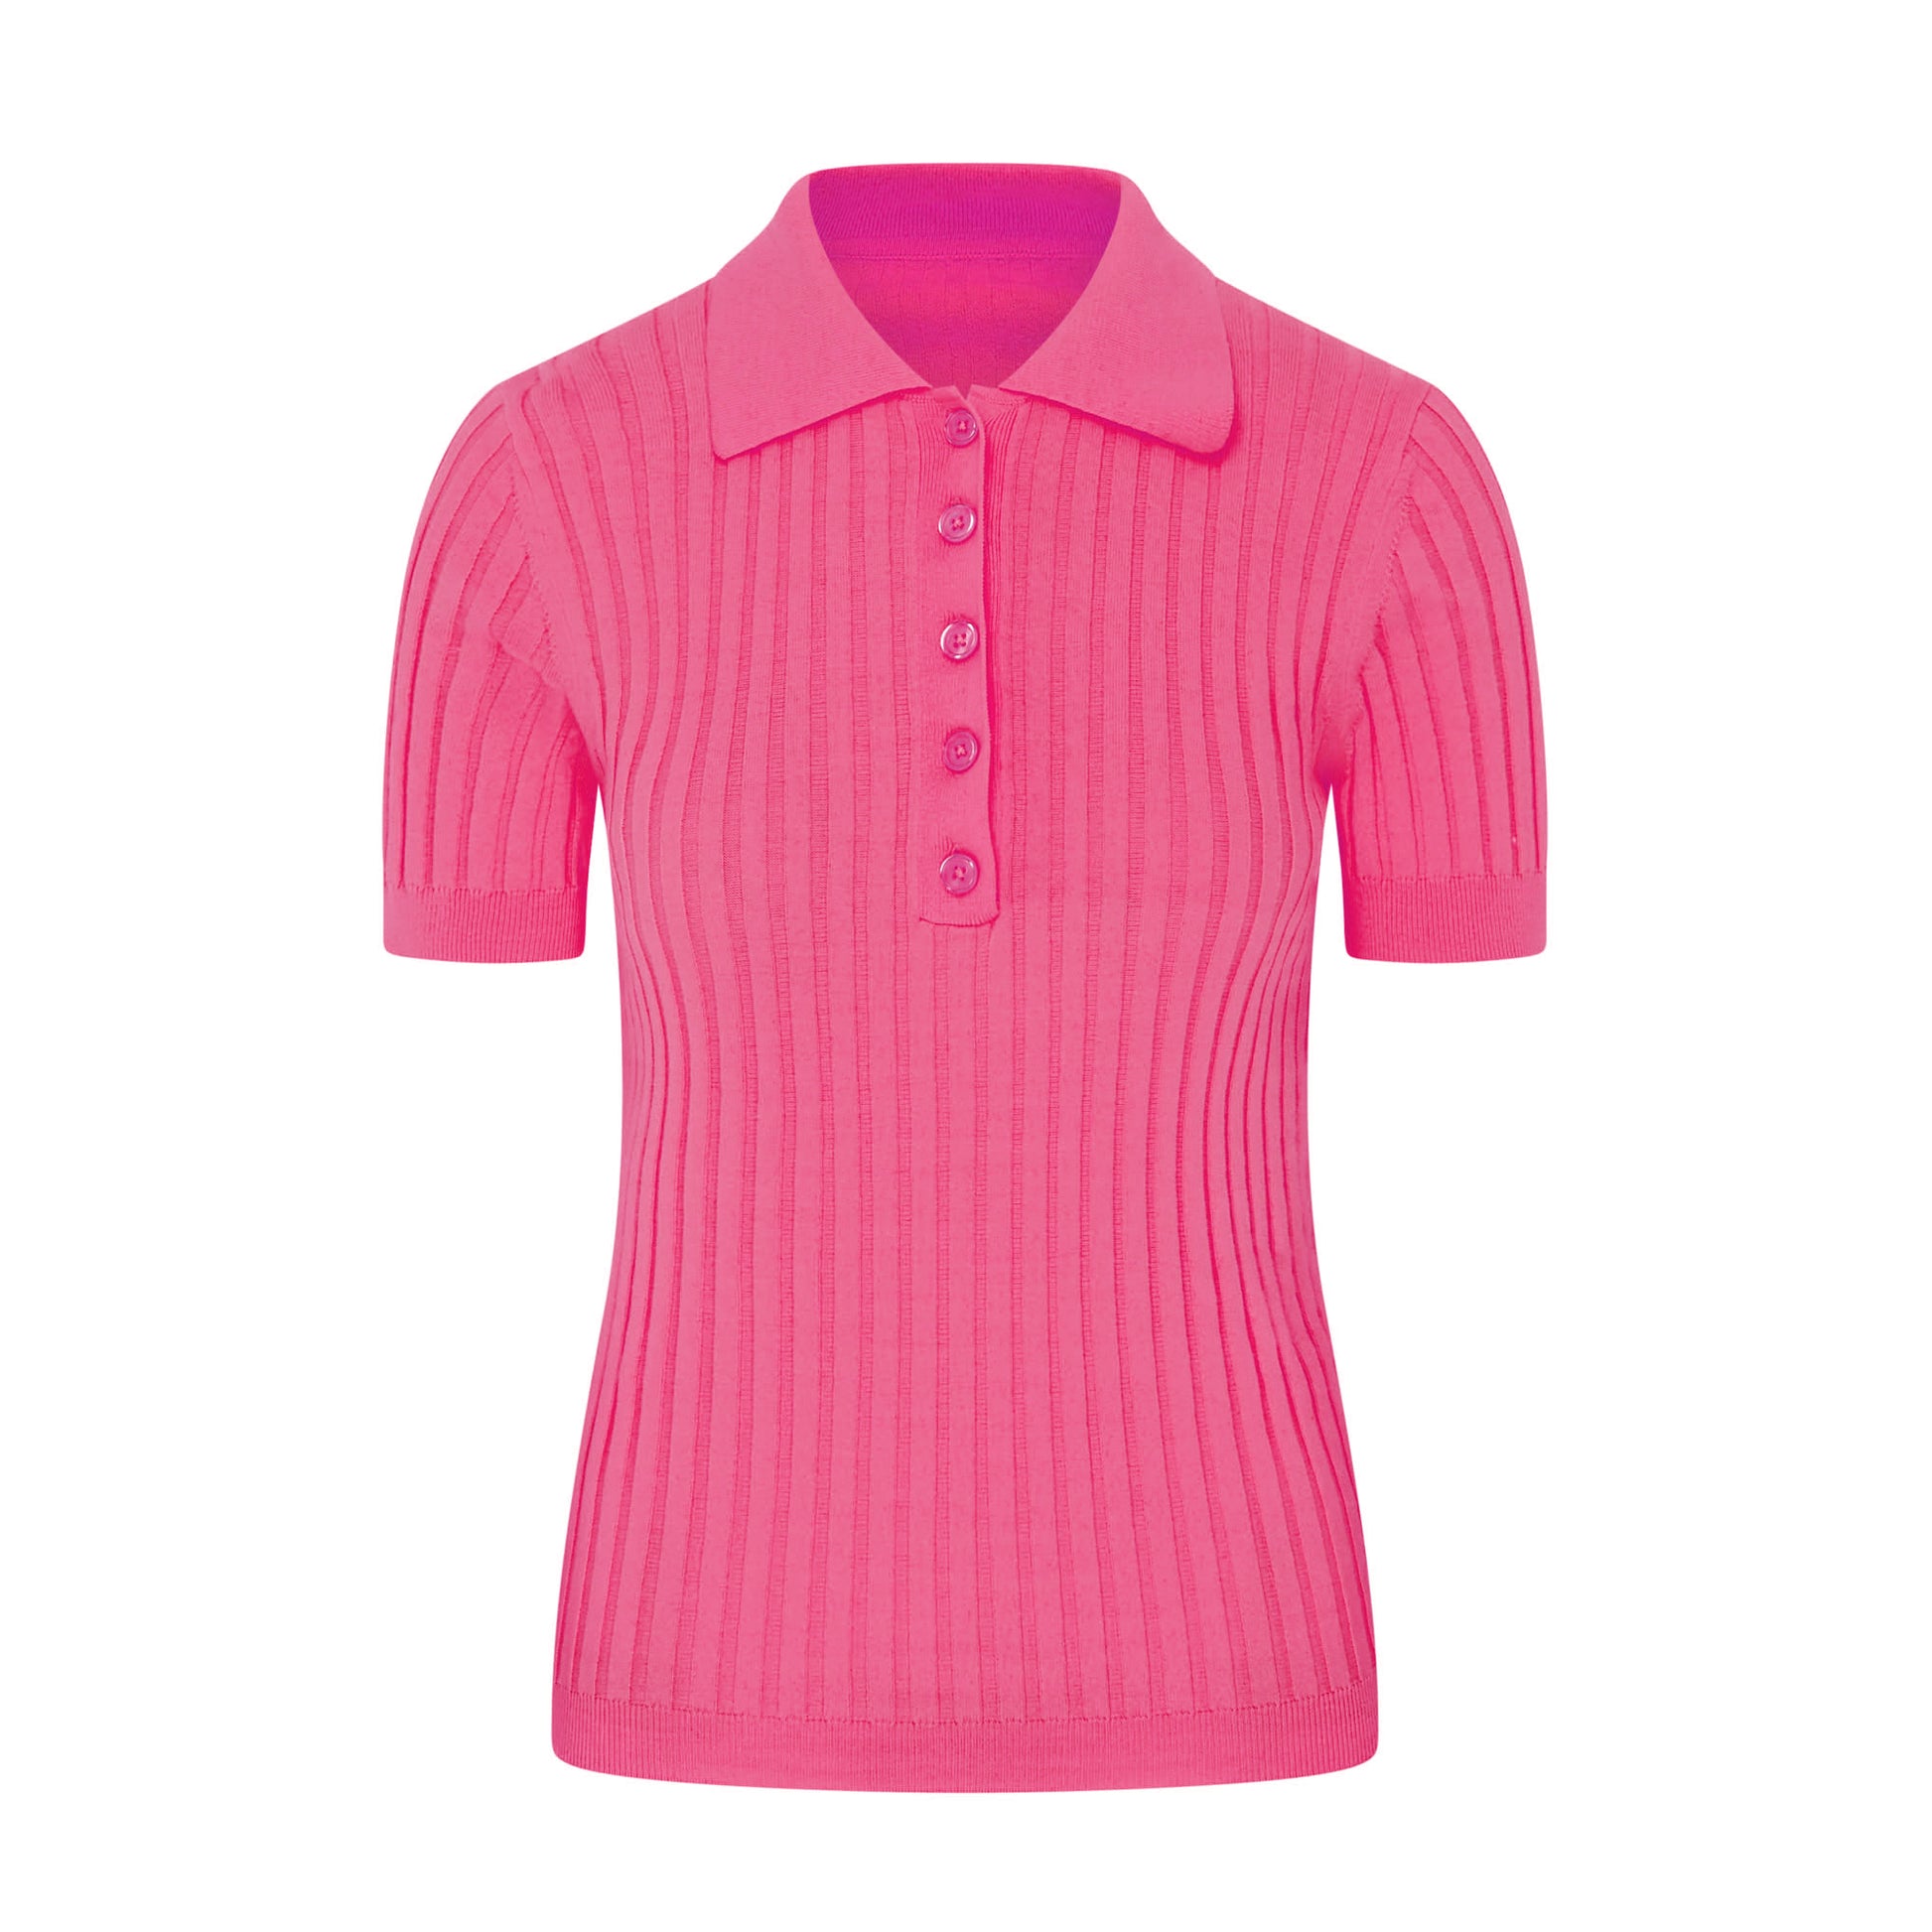 Swing Out Sister Ladies Lush Pink Short Sleeve Knitted Top